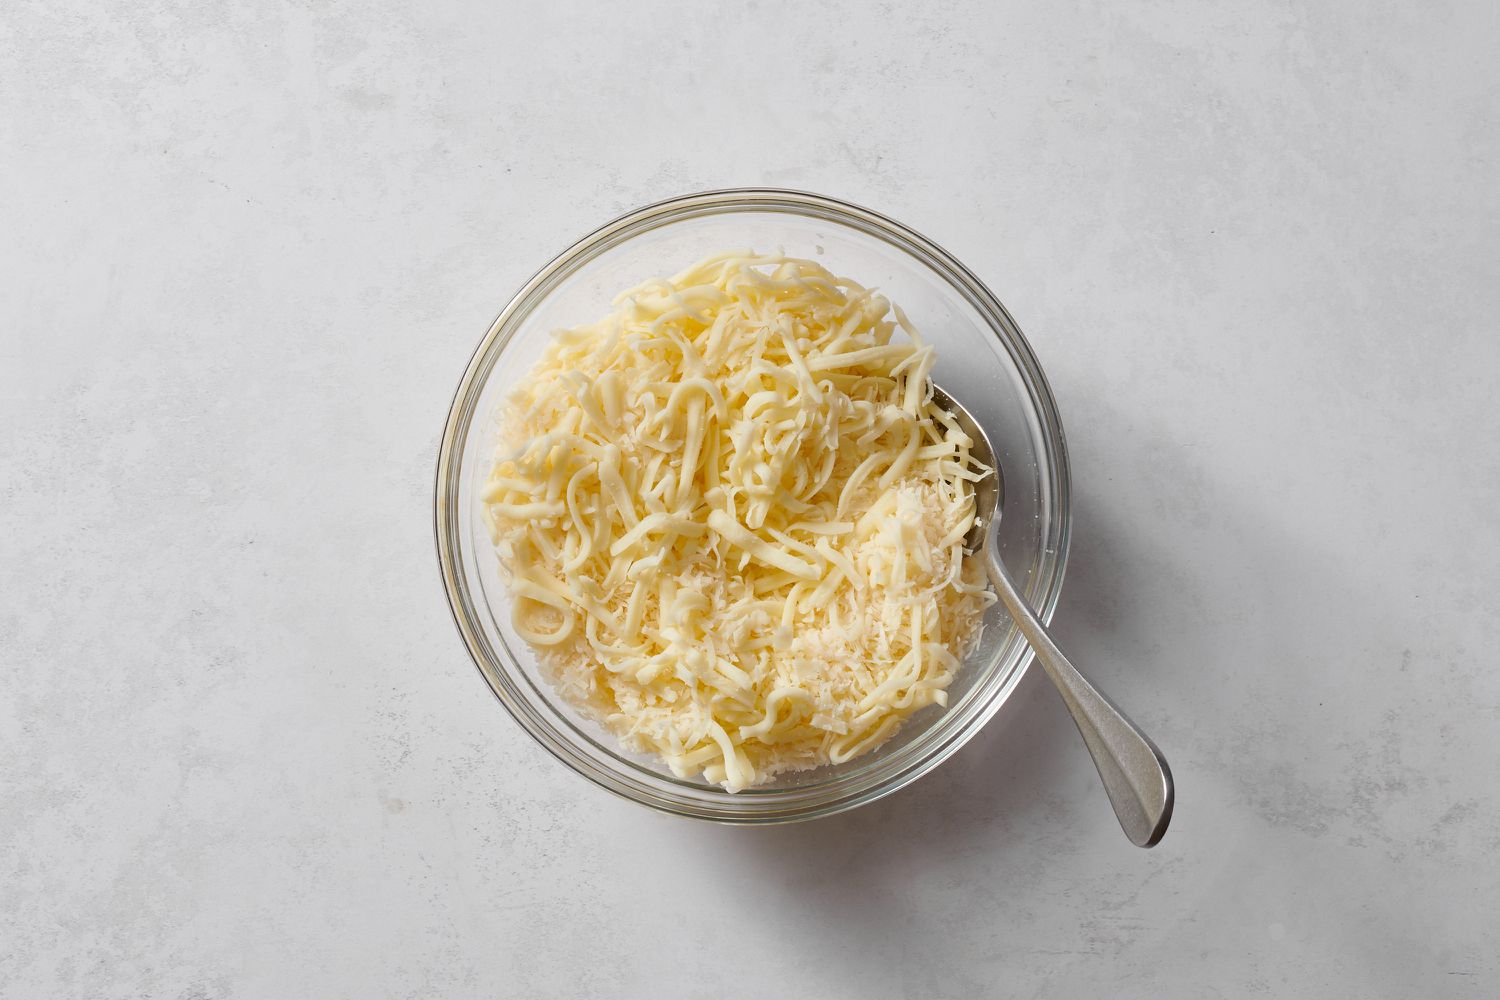 Shredded mozzarella and parmesan cheese in a bowl